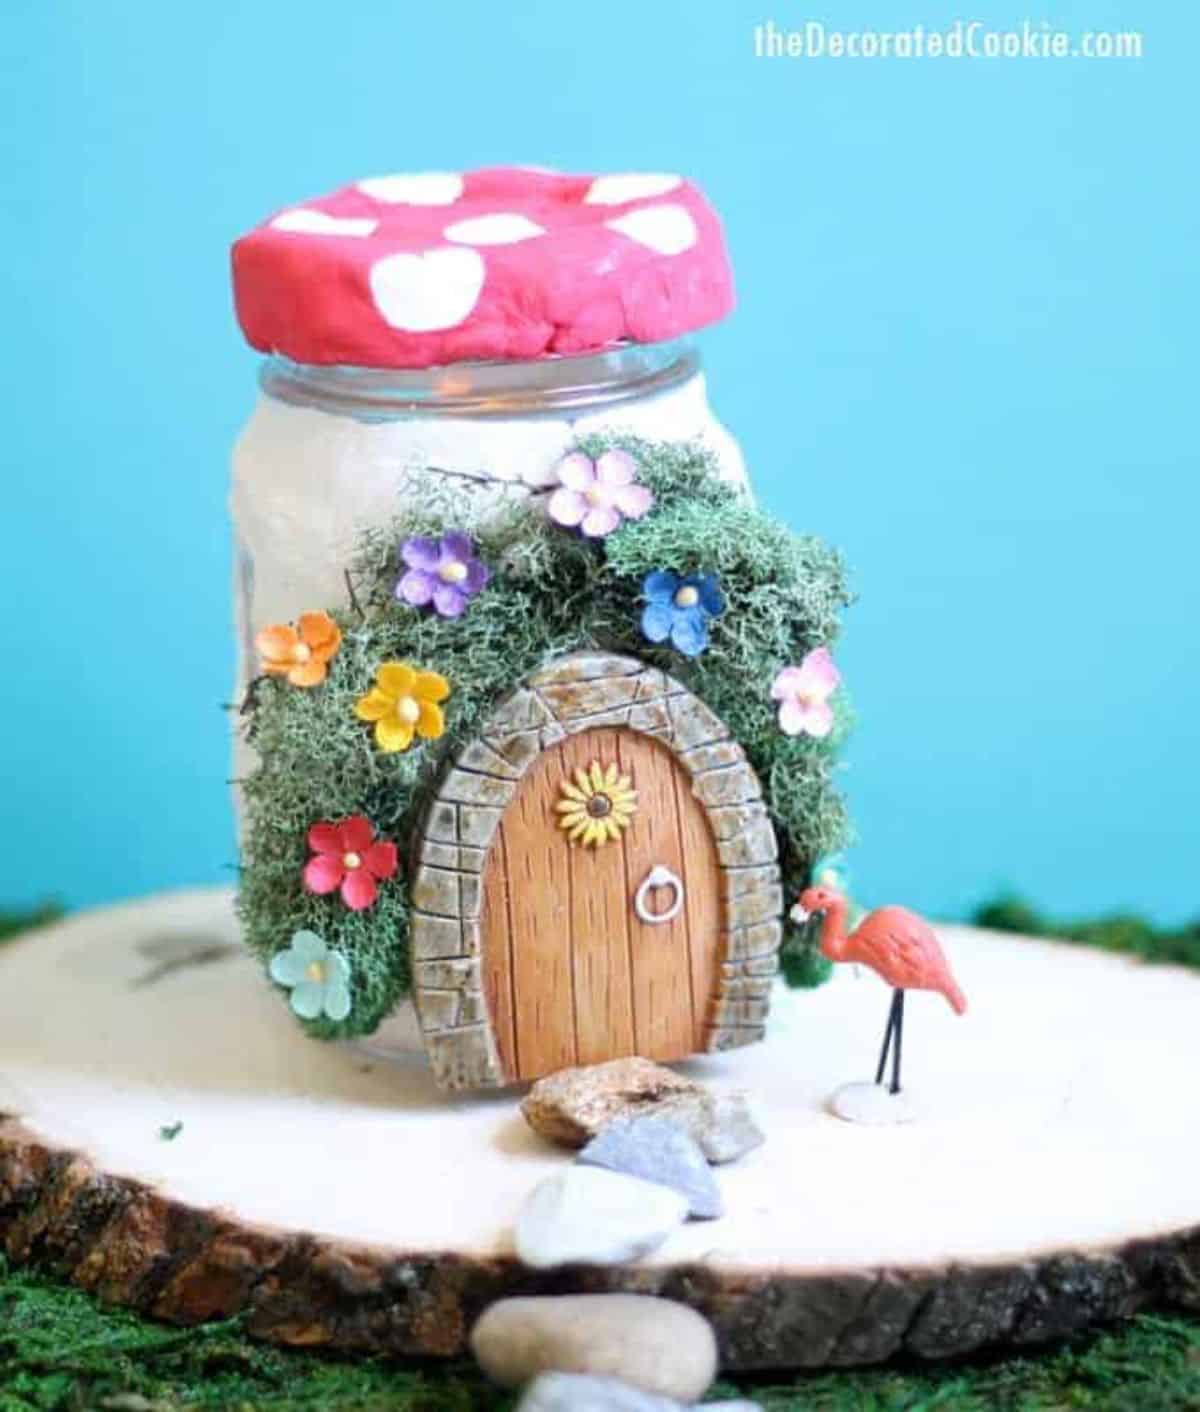 Mason jar fairy house on a wooden board with a tiny pink flamingo.